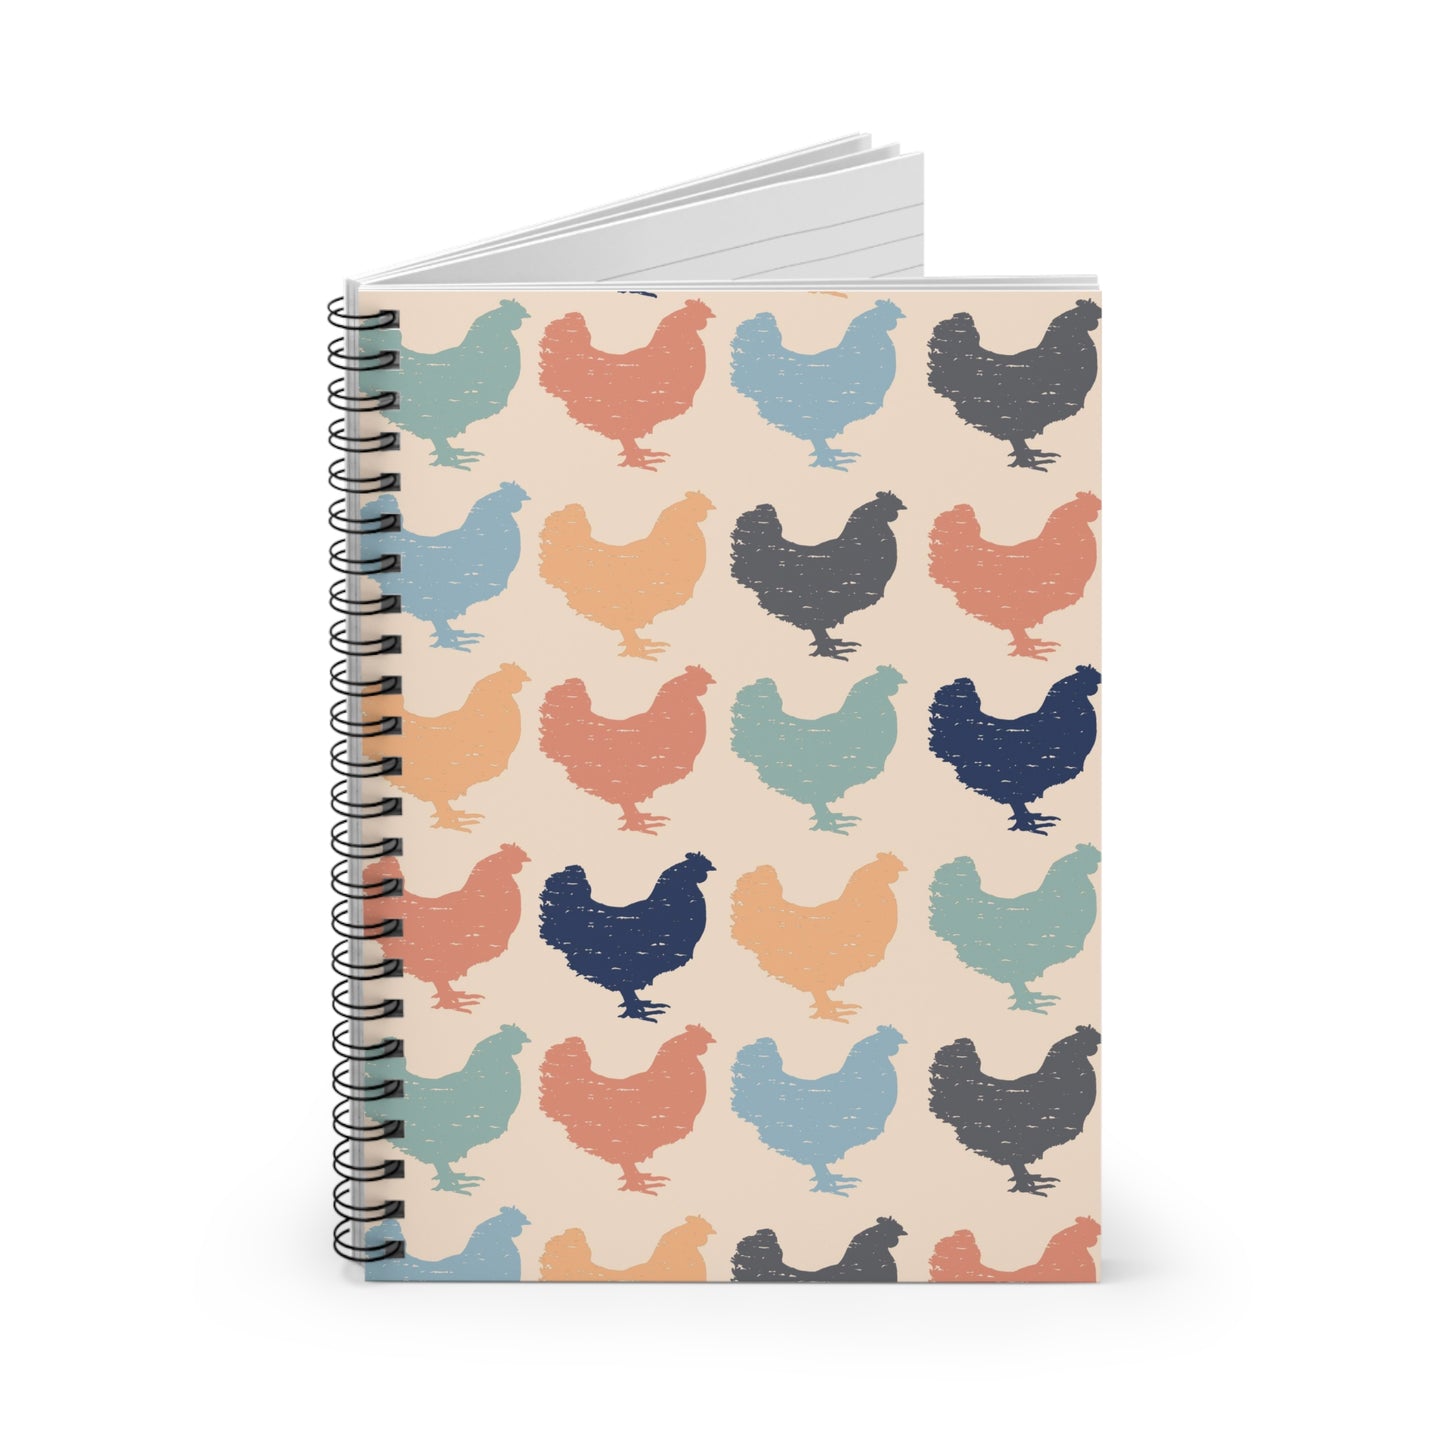 Colorful chicken Spiral Notebook - Ruled Line